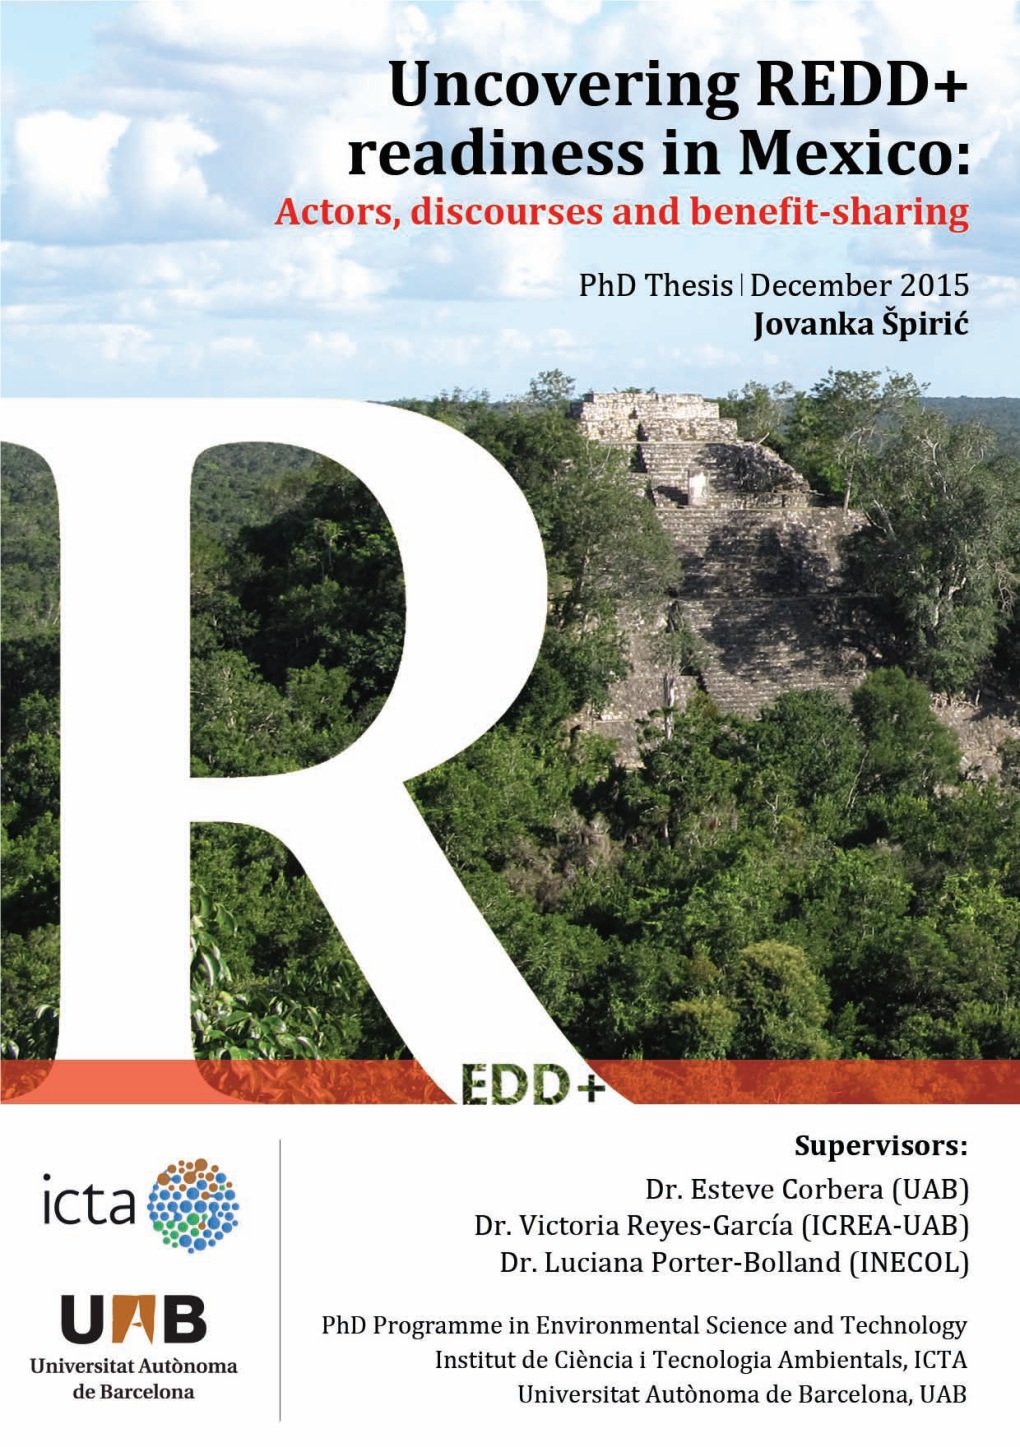 Uncovering REDD+ Readiness in Mexico: Actors, Discourses and Benefit-Sharing